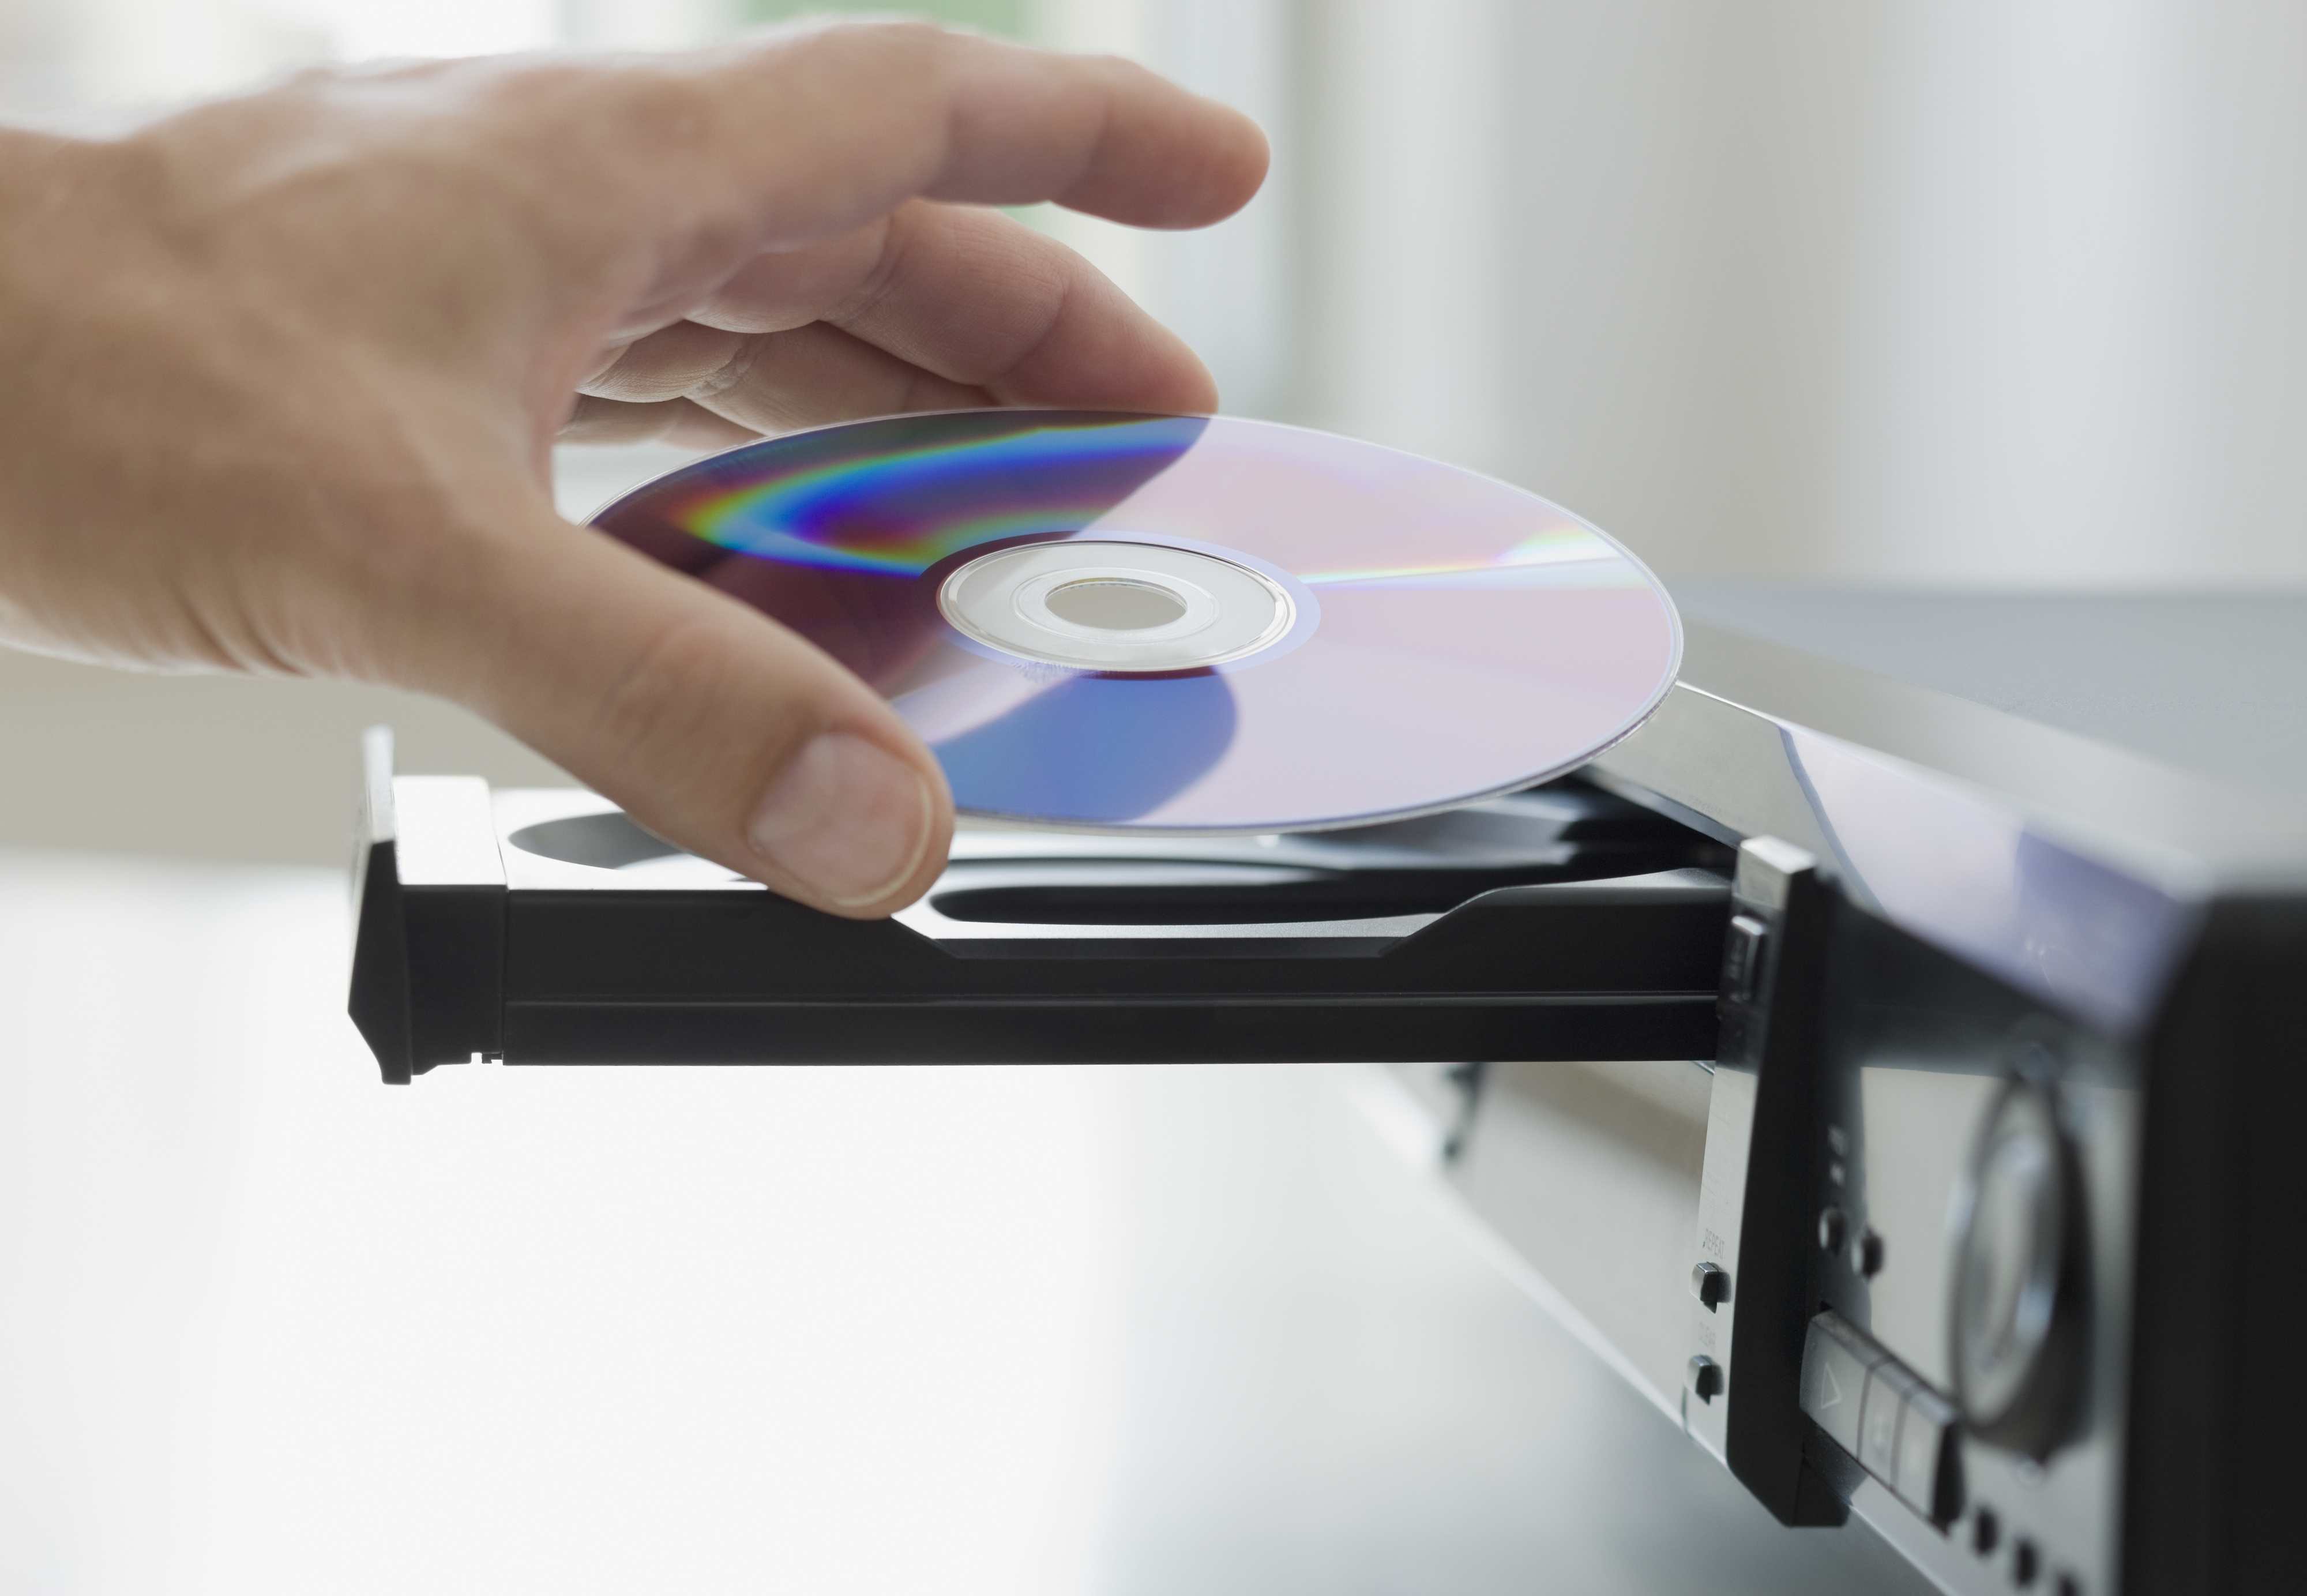 A hand putting a CD into a CD player